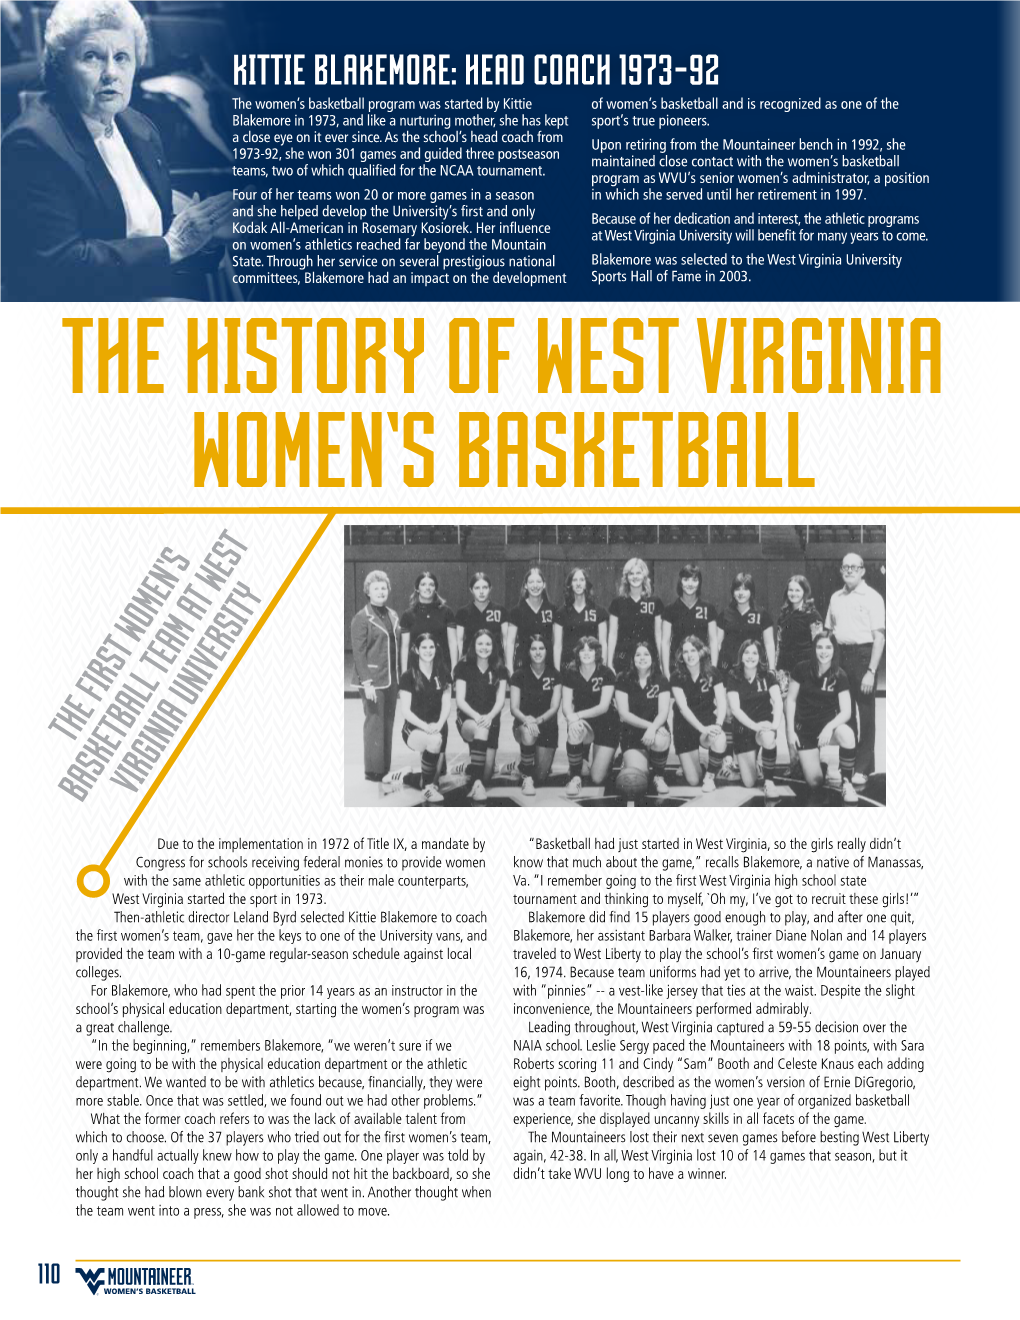 The History of West Virginia Women's Basketball